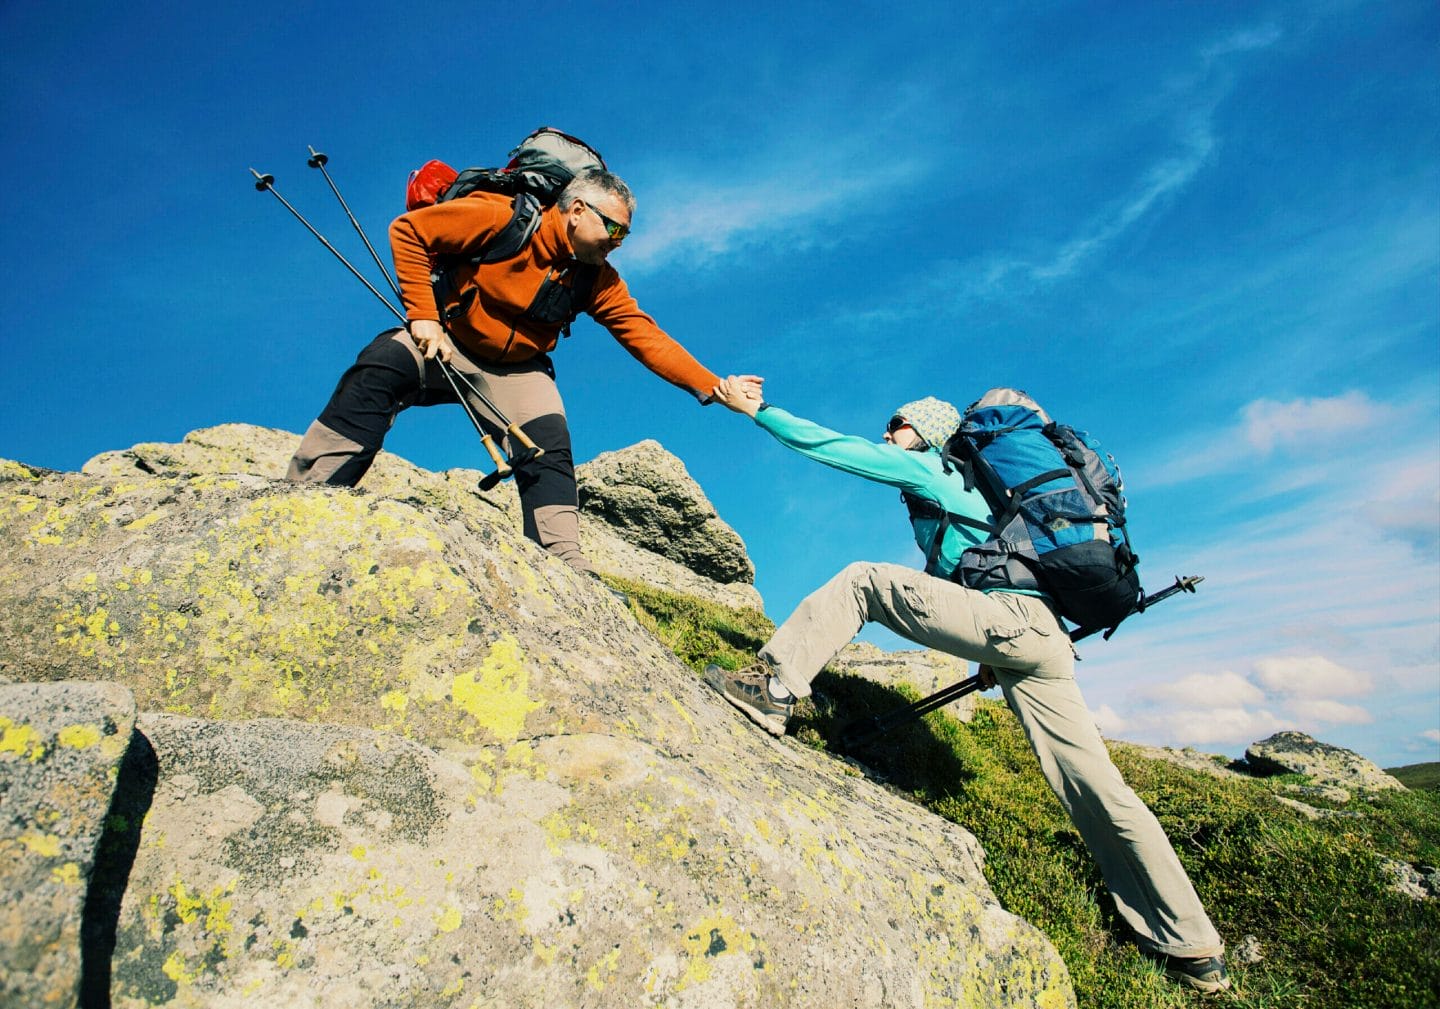 Couple Man and Woman help giving hands climbing rocky mountains Love and Travel Lifestyle concept hiking adventure vacations outdoor 903605010 5207x3648 scaled